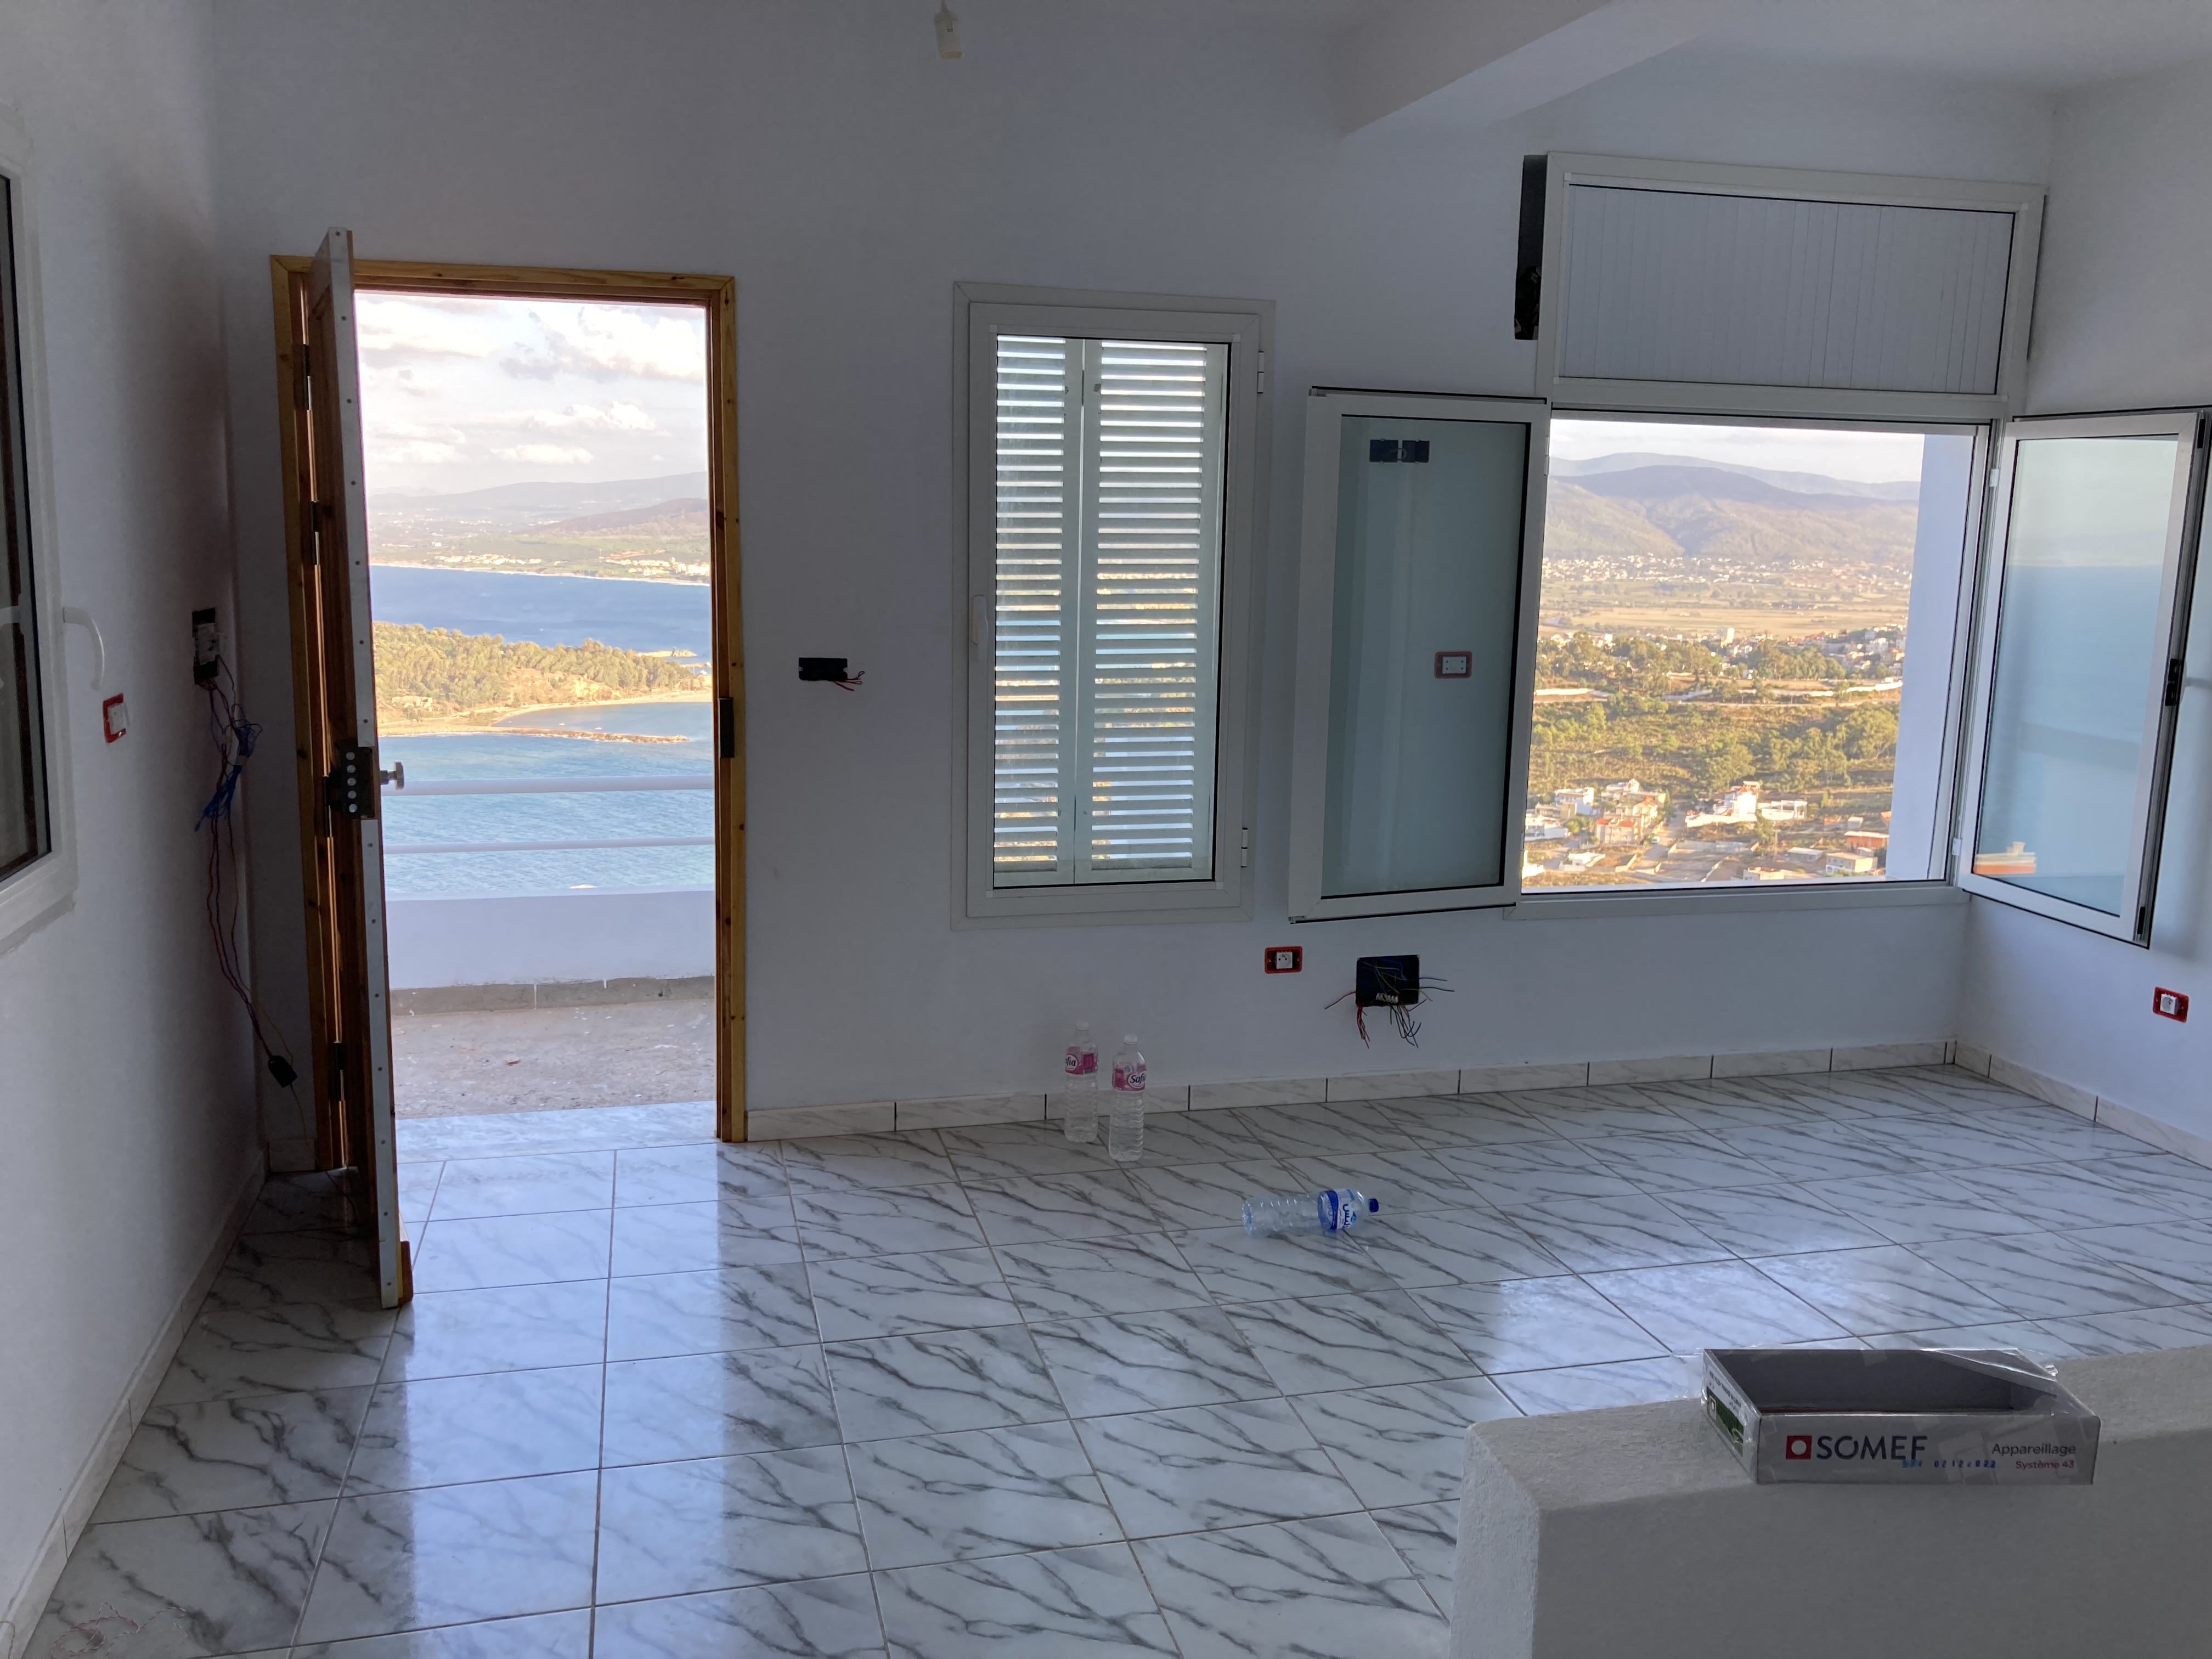 Tabarka Tabarka Location Appart. 3 pices Appartement ensoleill et vue mer